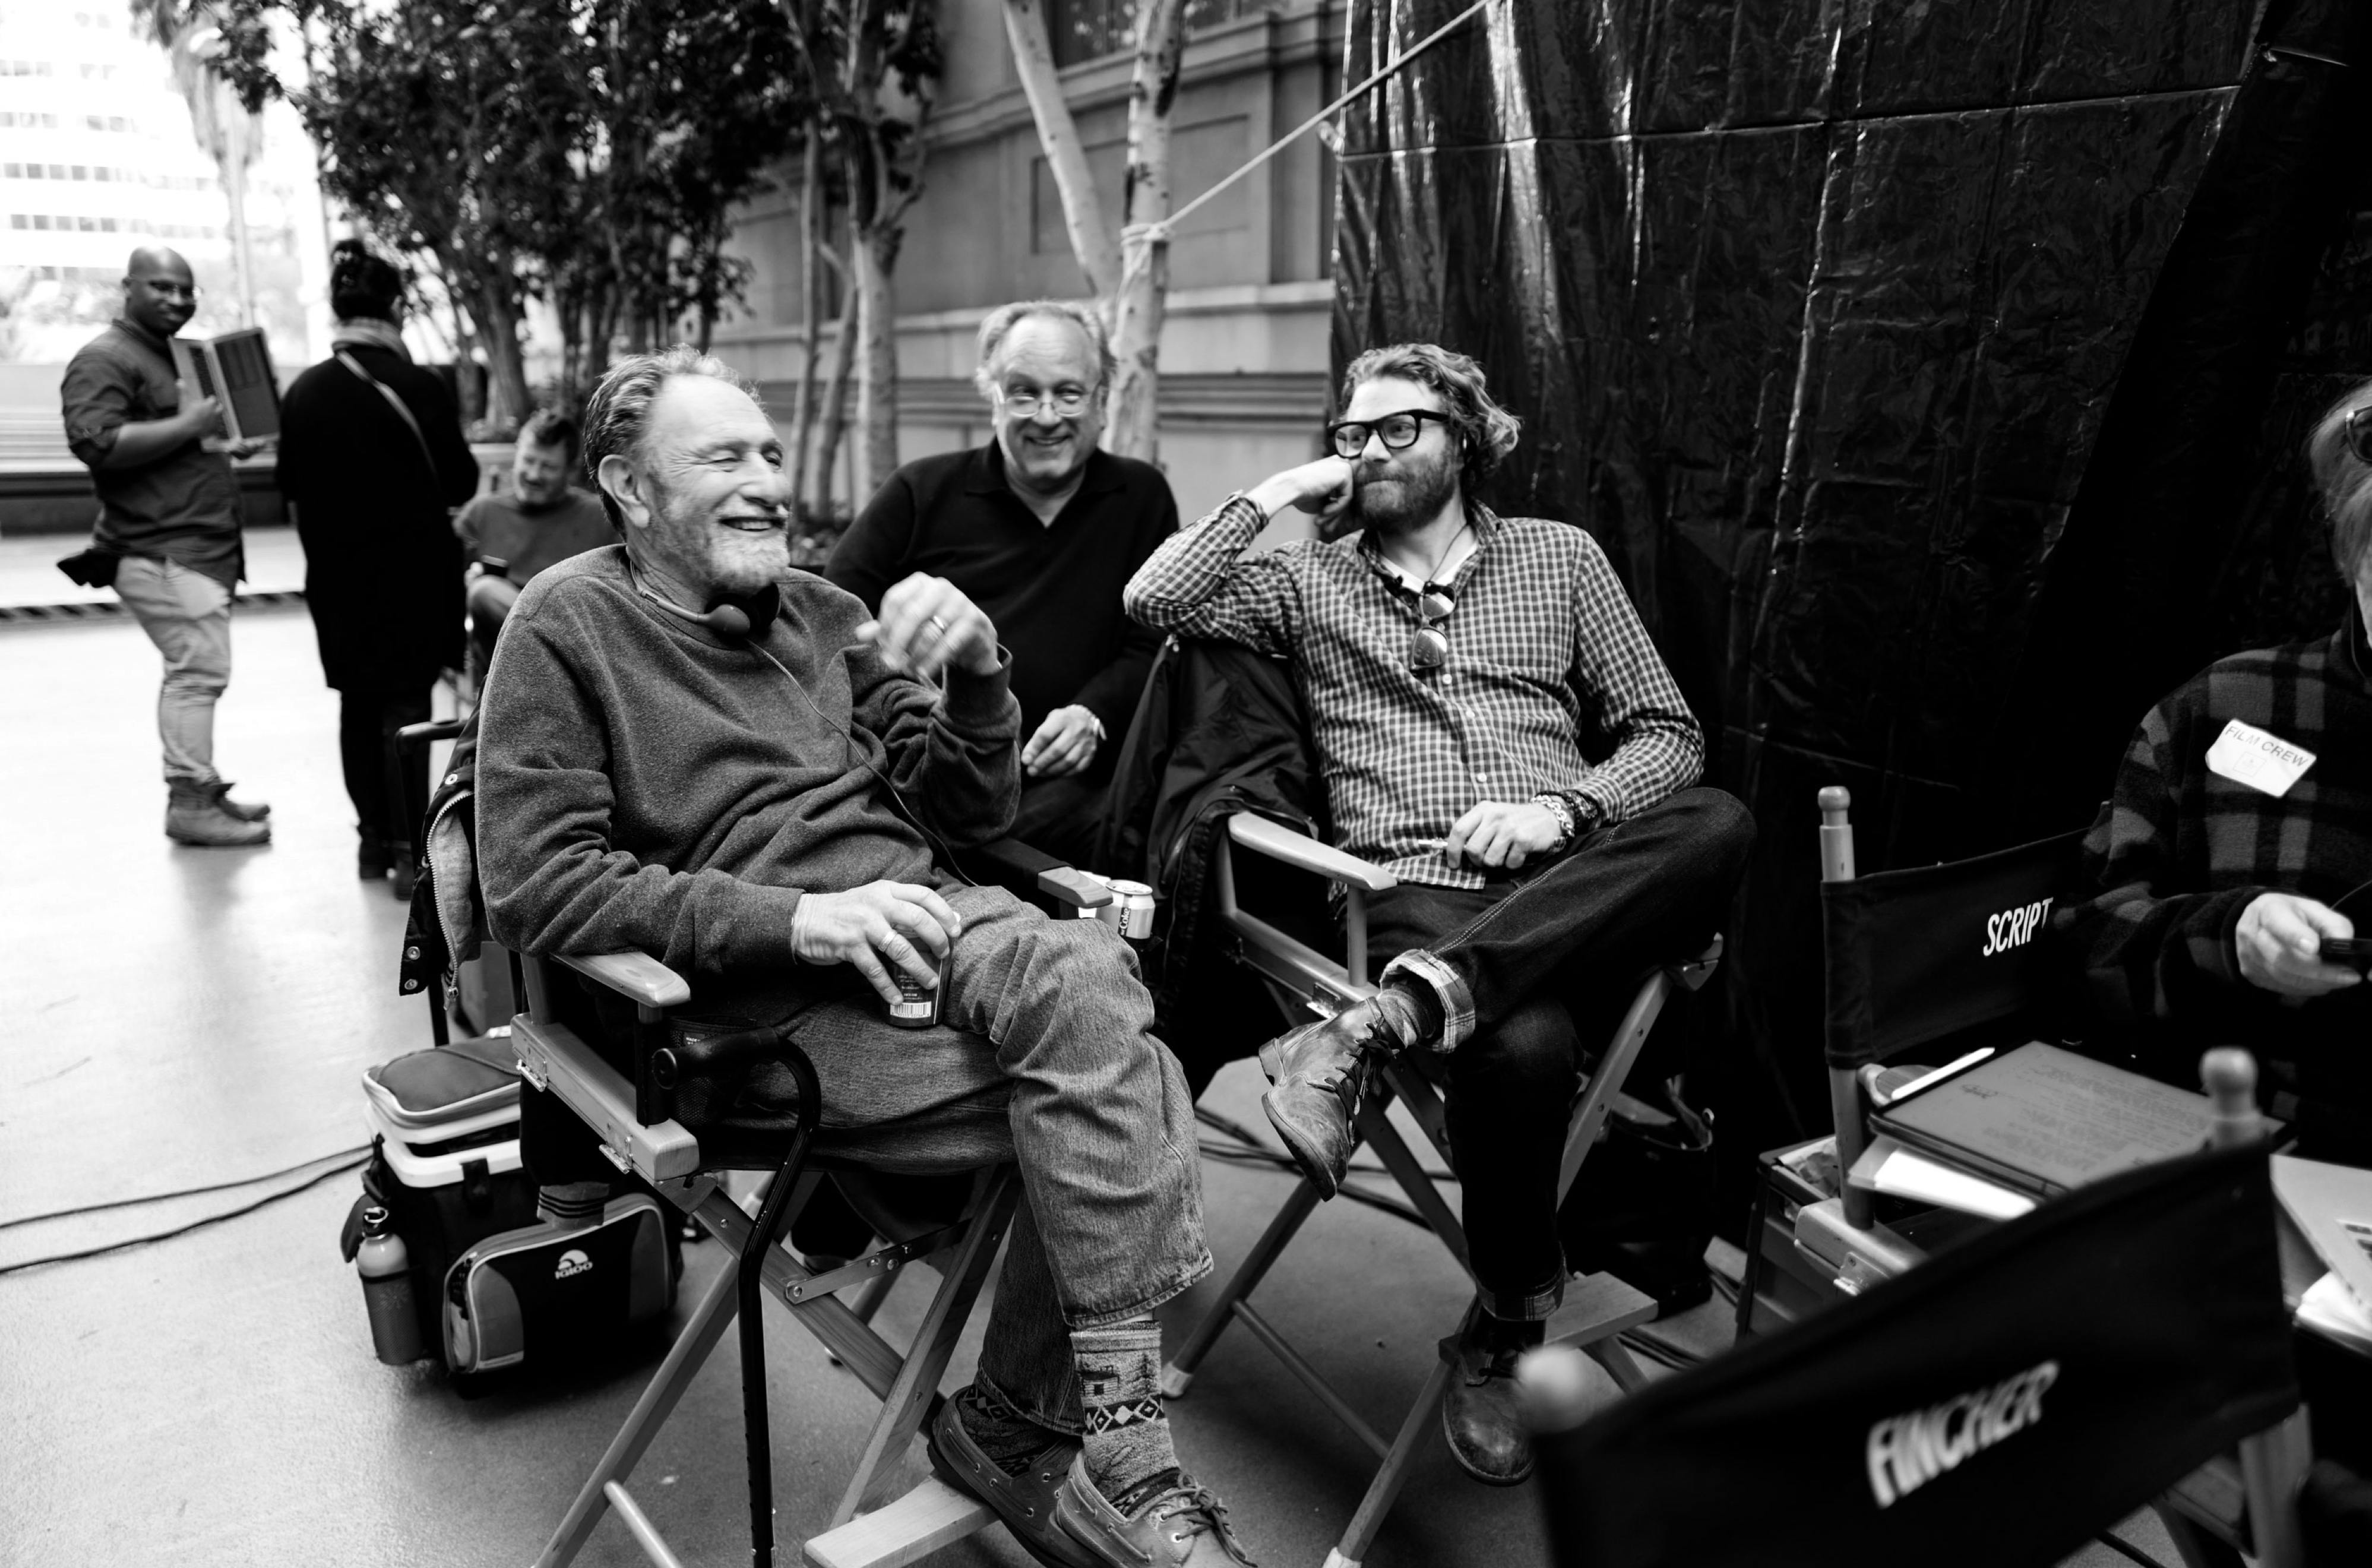 A black-and-white behind-the-scenes photo of Roth with Urbanski and Messerschmidt on the set of Mank. Roth and Fincher are seated in director’s chairs, smiling.